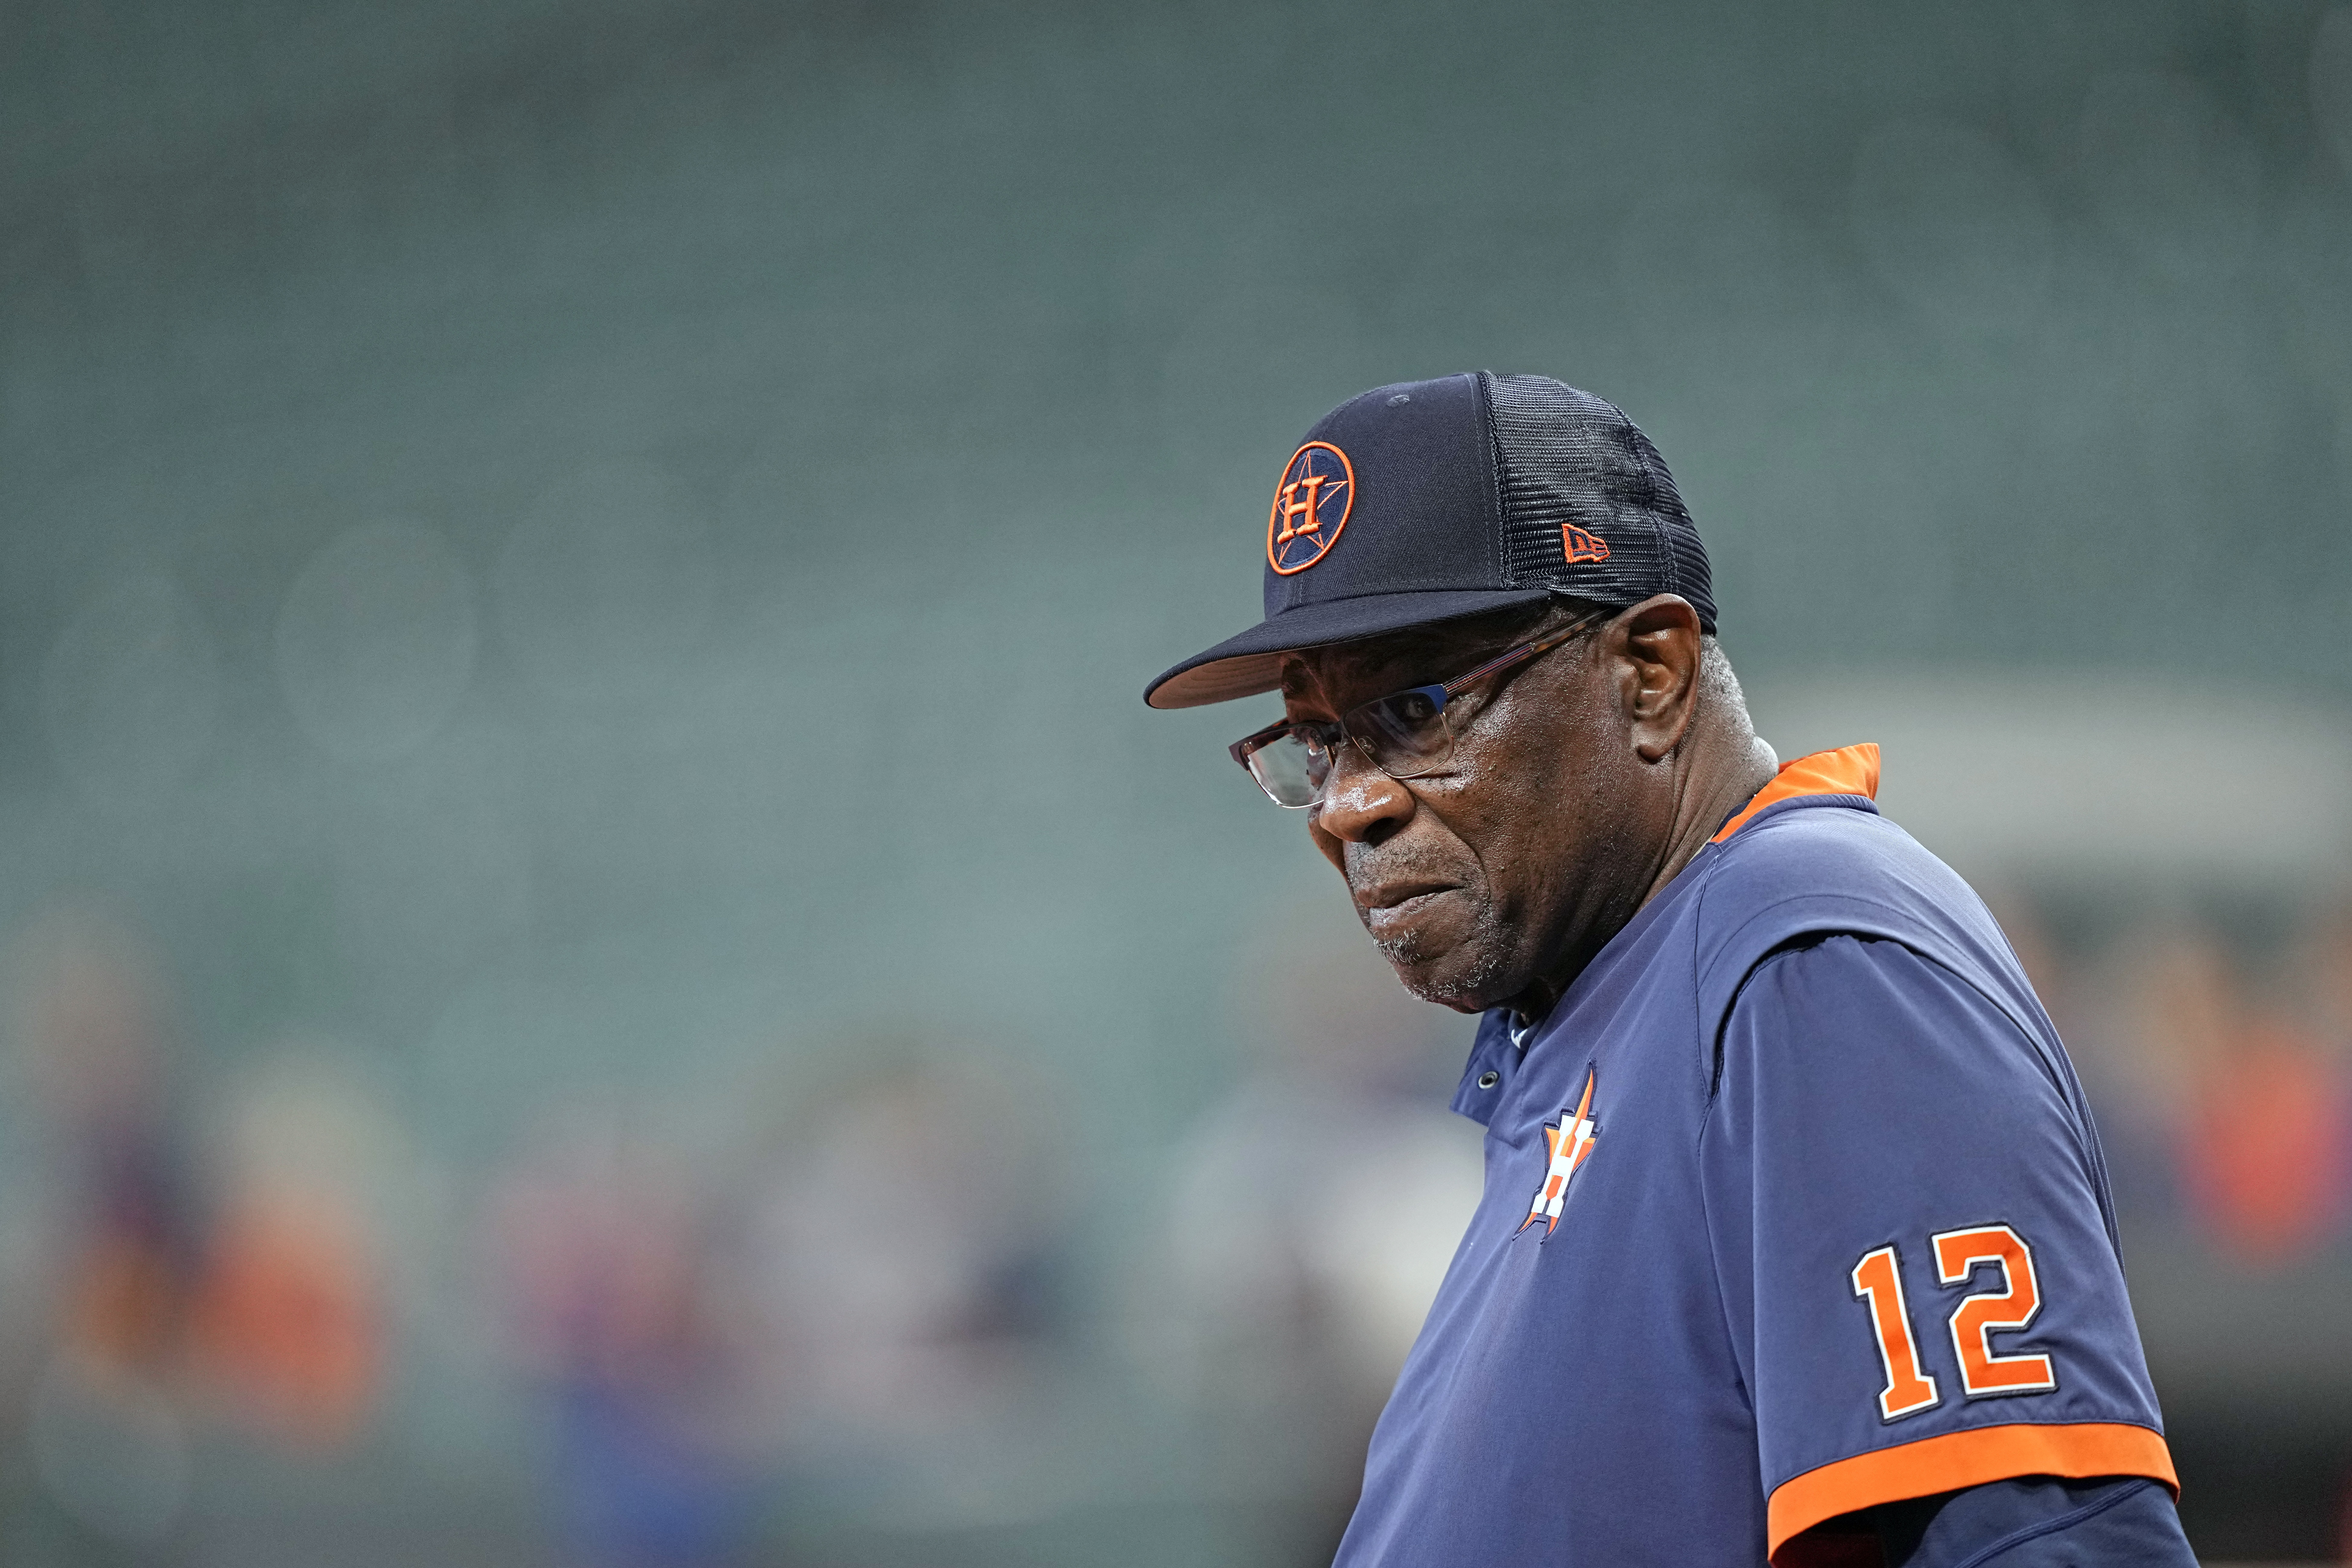 Former Reds manager Dusty Baker opts for COVID-19 vaccination